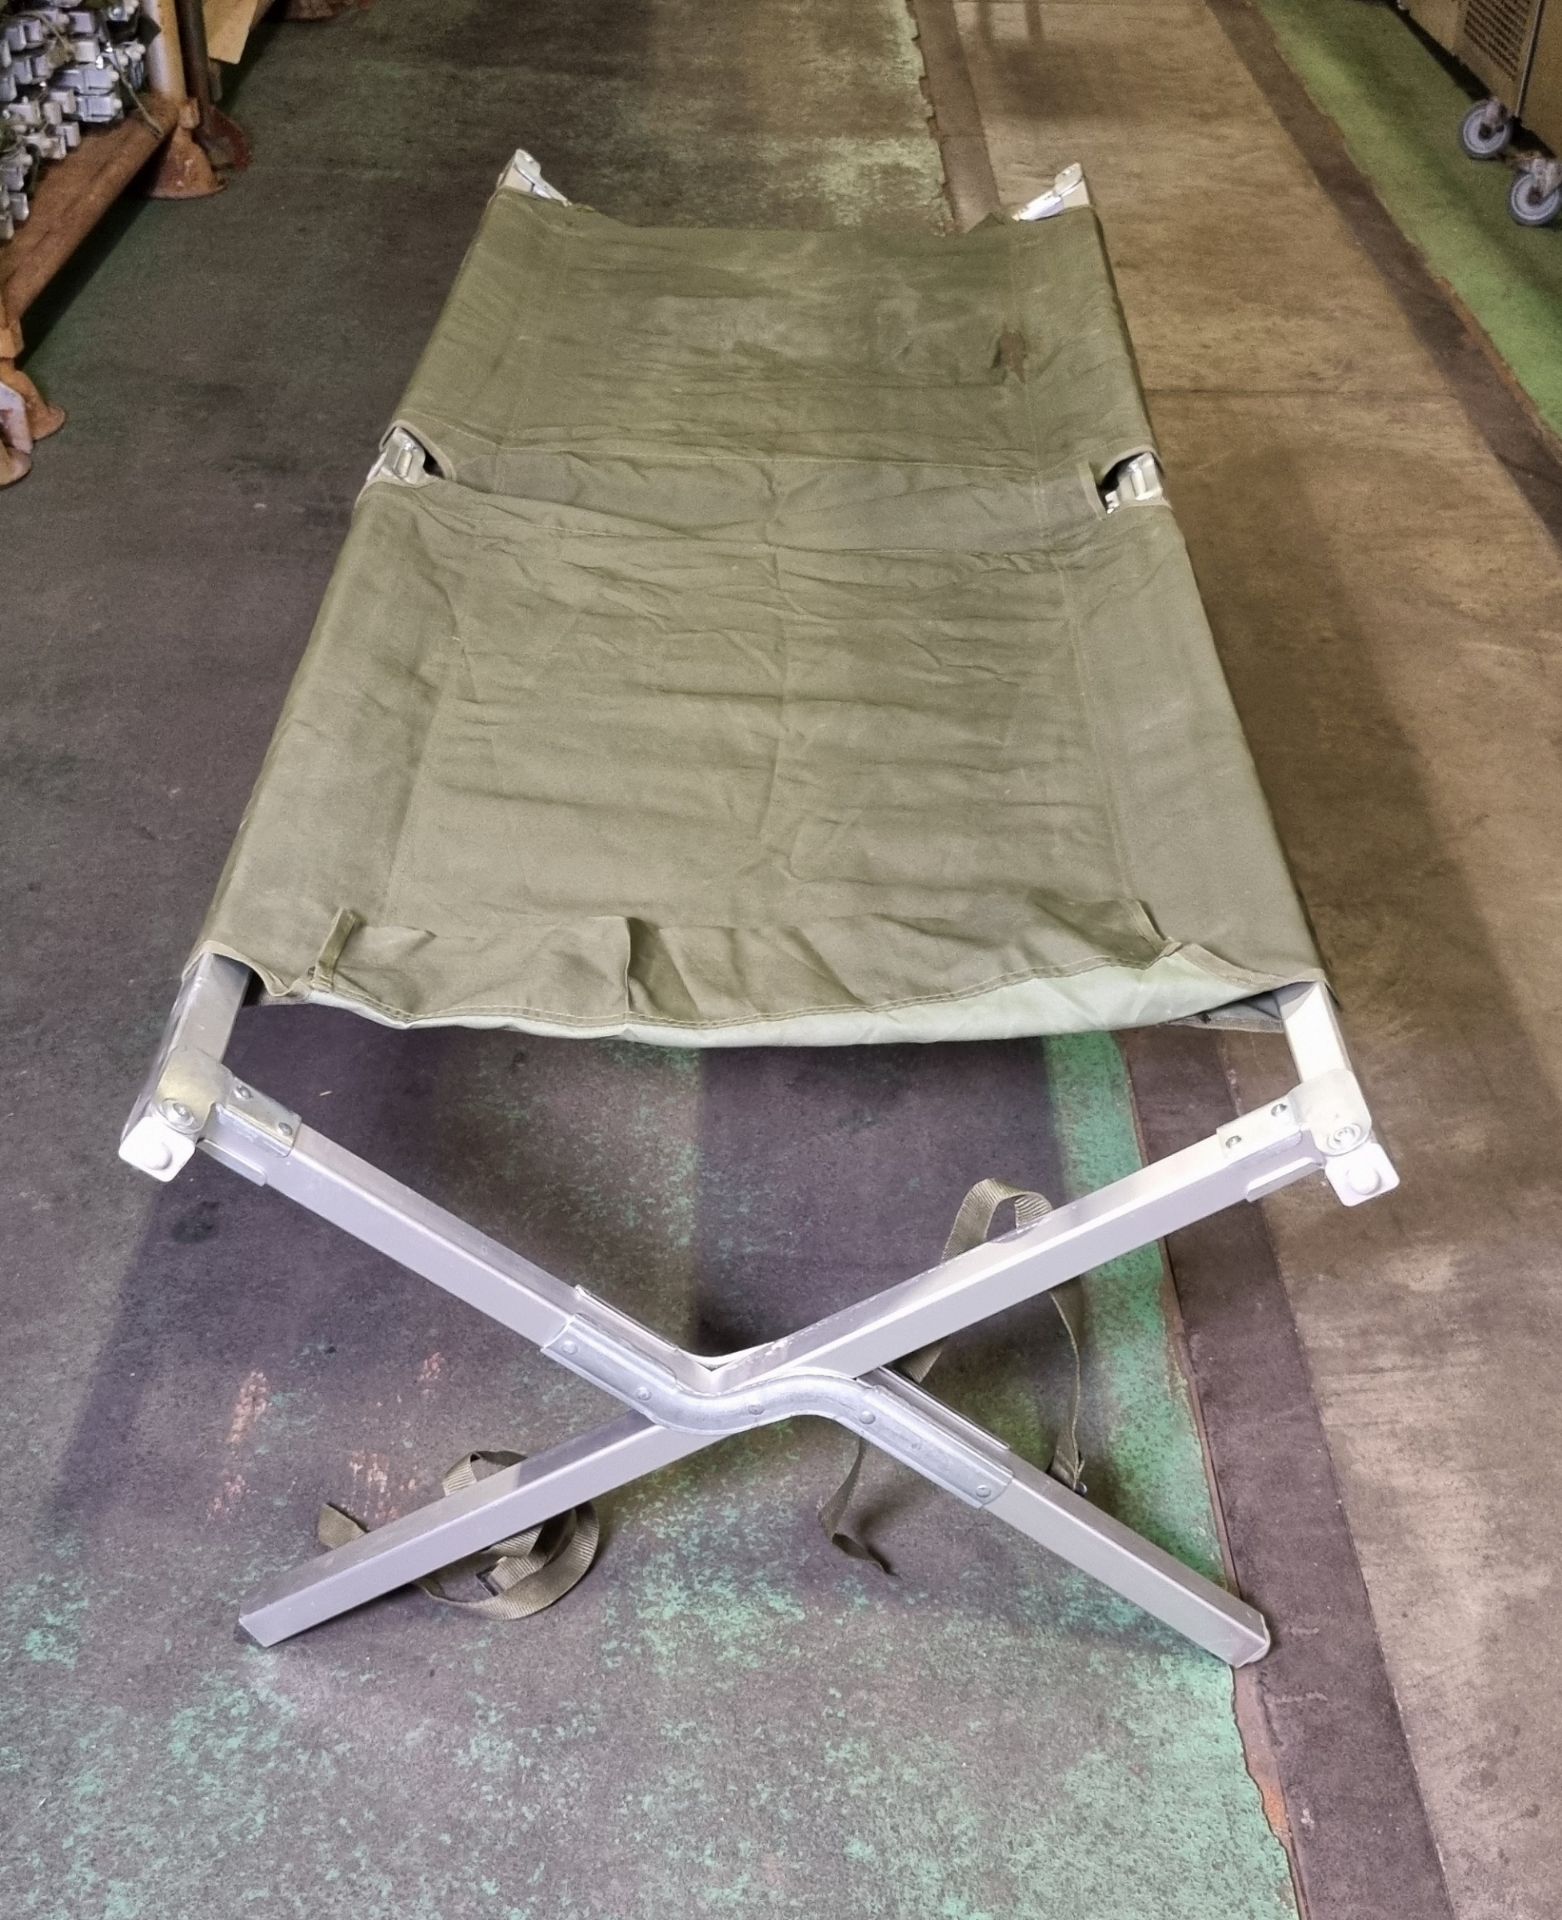 15x Folding field cots - L 1900 x W 700 x H 450mm - SPARES OR REPAIRS - Image 5 of 5